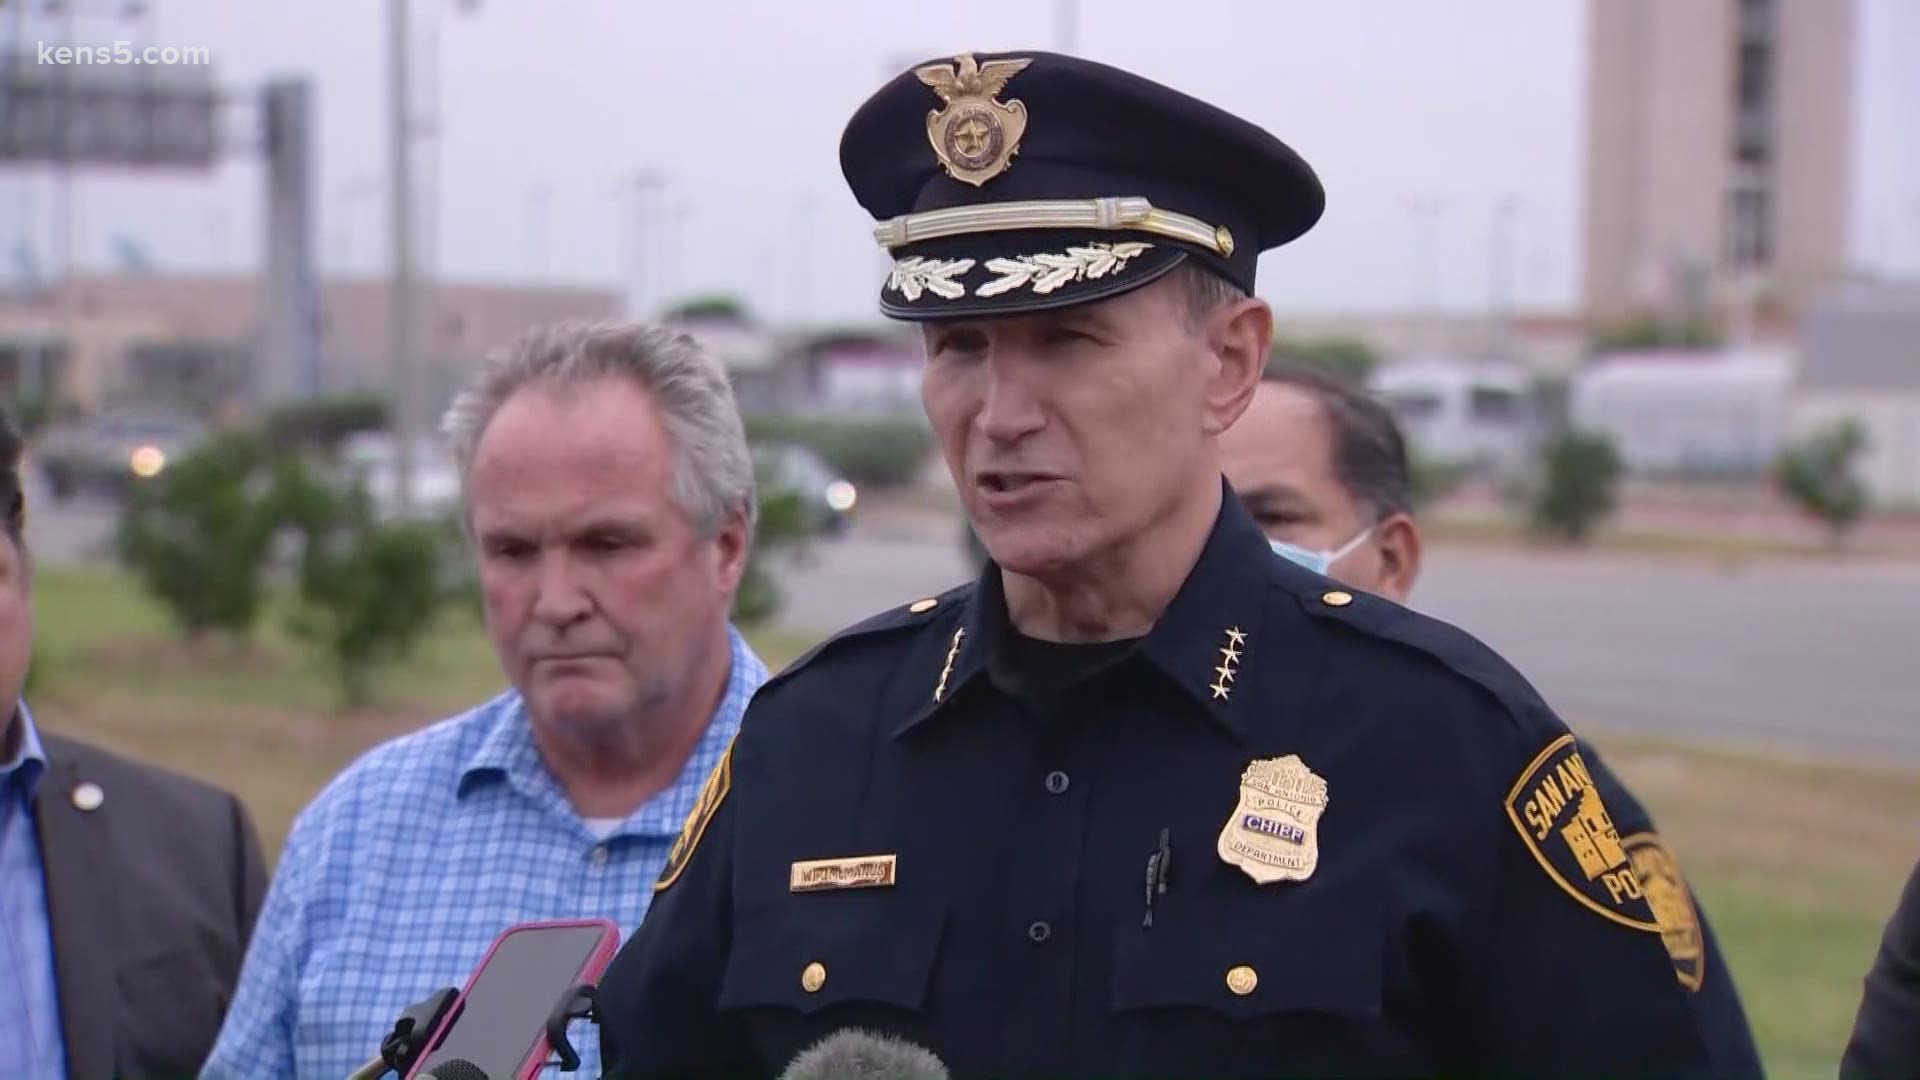 San Antonio Police officials say the gunman was in his 40s and was suffering from mental health issues.